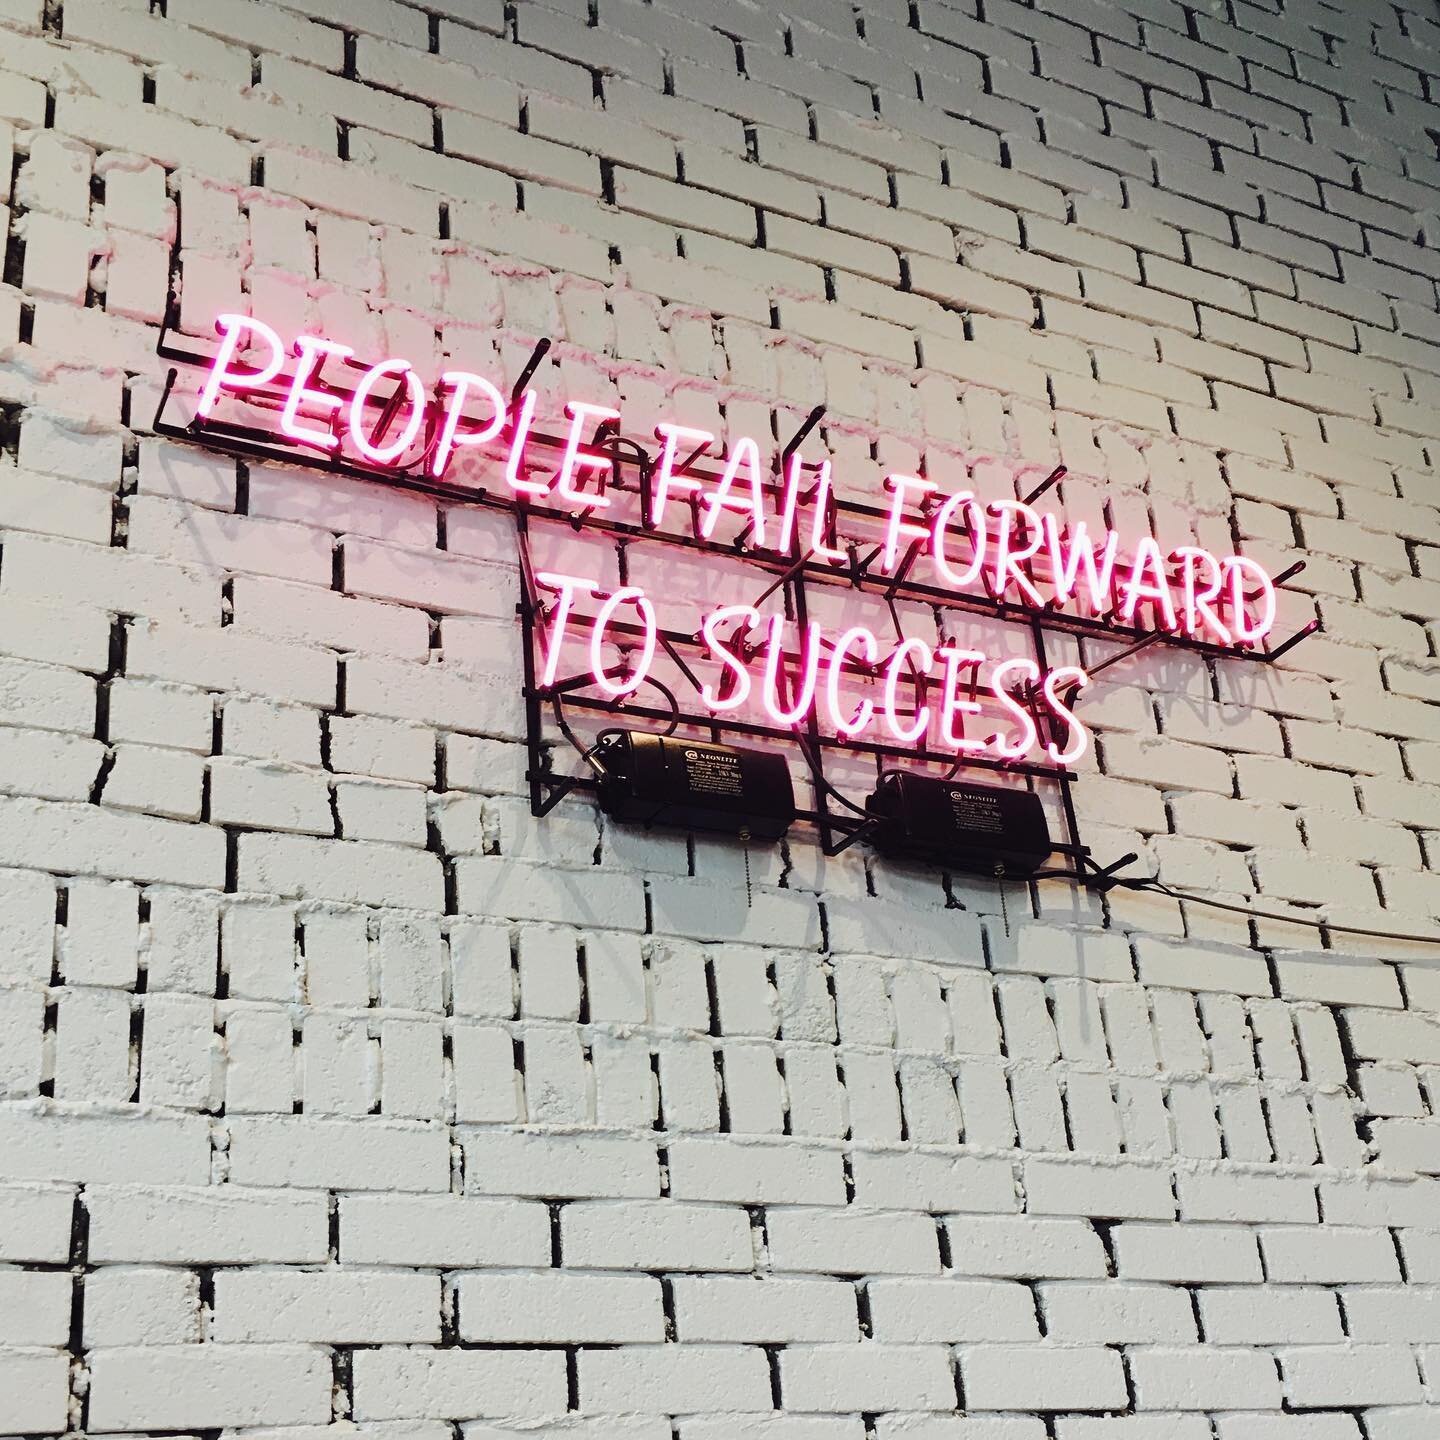 I hope you can find time to relax this weekend🌸
.
#SiouxFalls #EnergyWork #FunctionalMedicine #ReikiEnergy #HolisticHealthCare #HolisticWellbeing #Telemedicine #FeelGoodMood
.
.
.
[Image Description: A white brick wall with a pink neon sign that rea